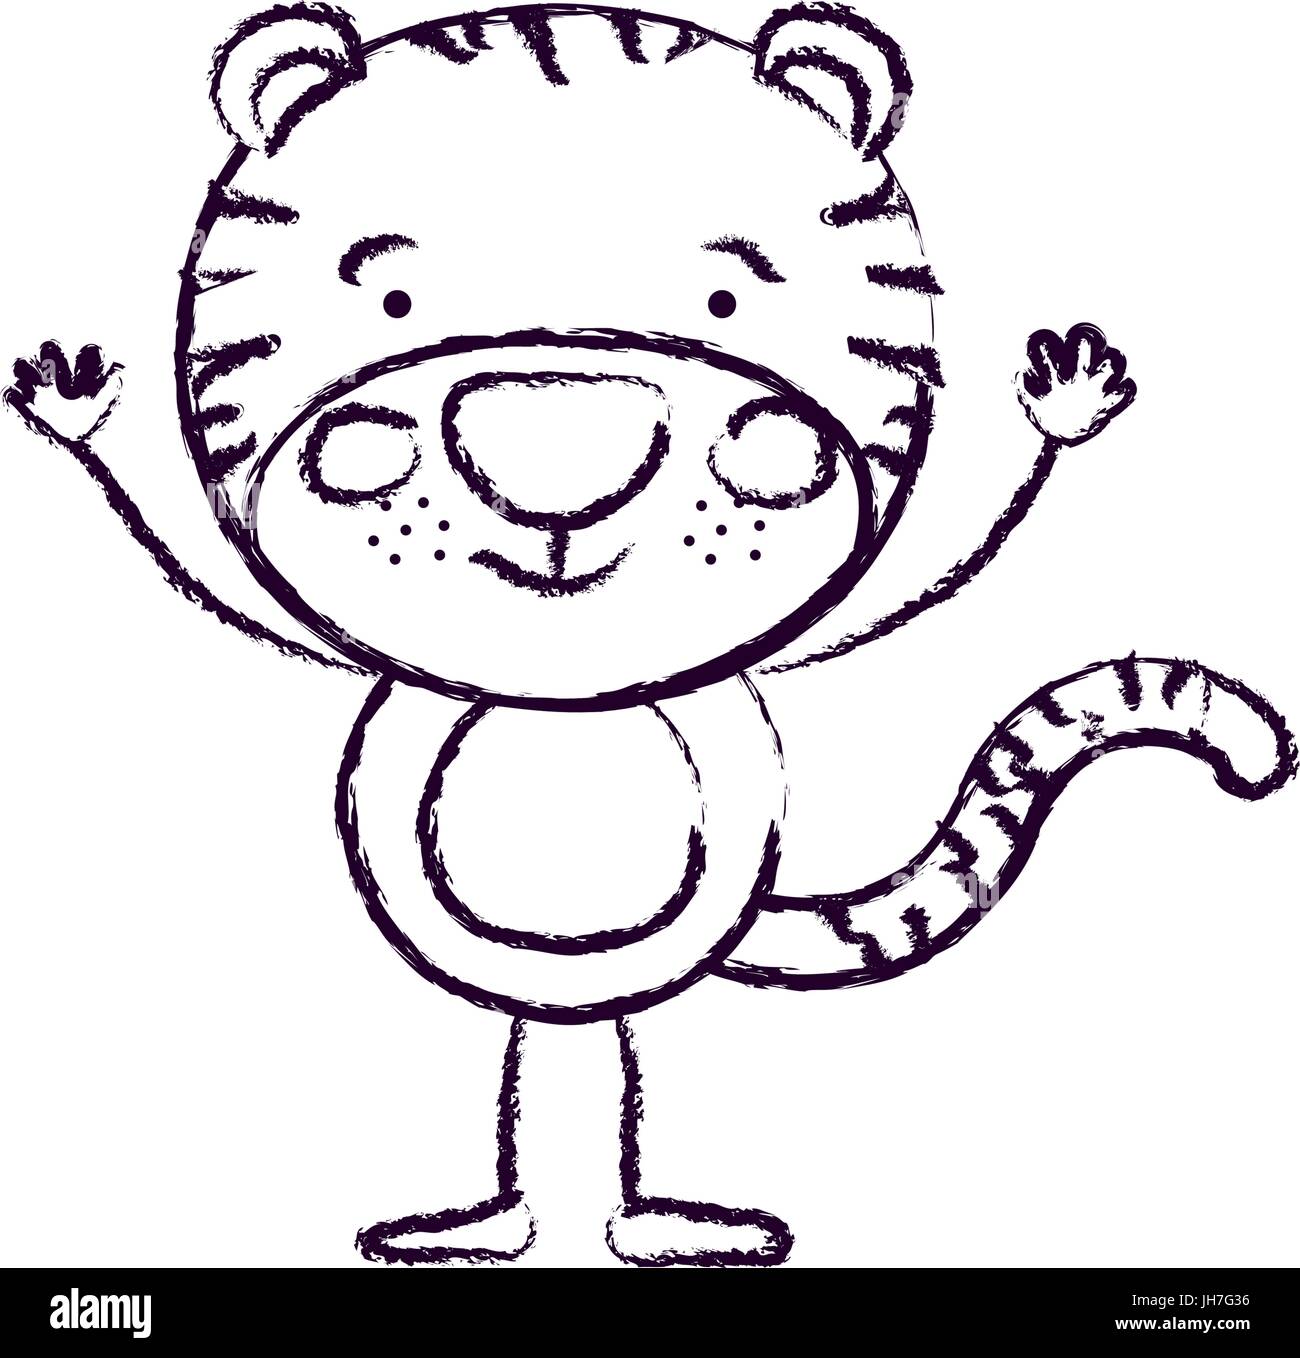 blurred silhouette caricature of cute tigger happiness expression with hands up Stock Vector